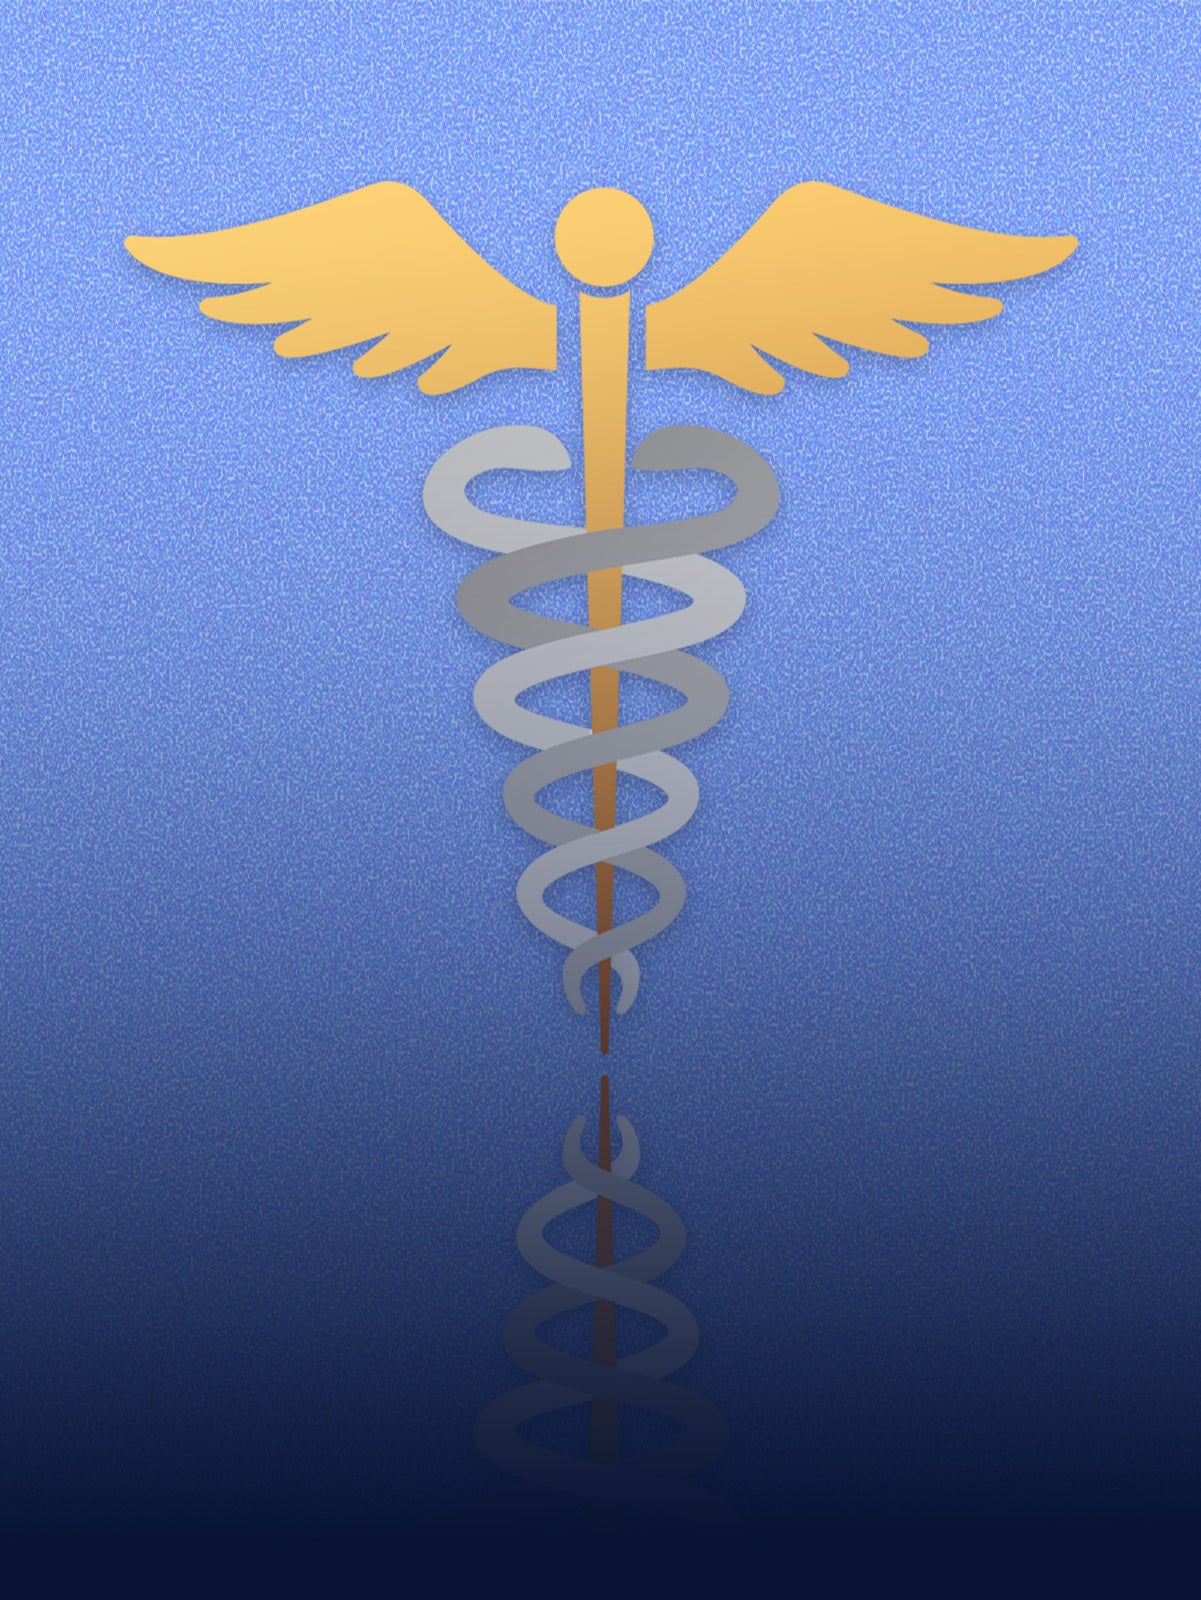 Vector illustration: A golden caduceus is wrapped with two gray snakes. The illustration is on a blue, speckled gradient background.